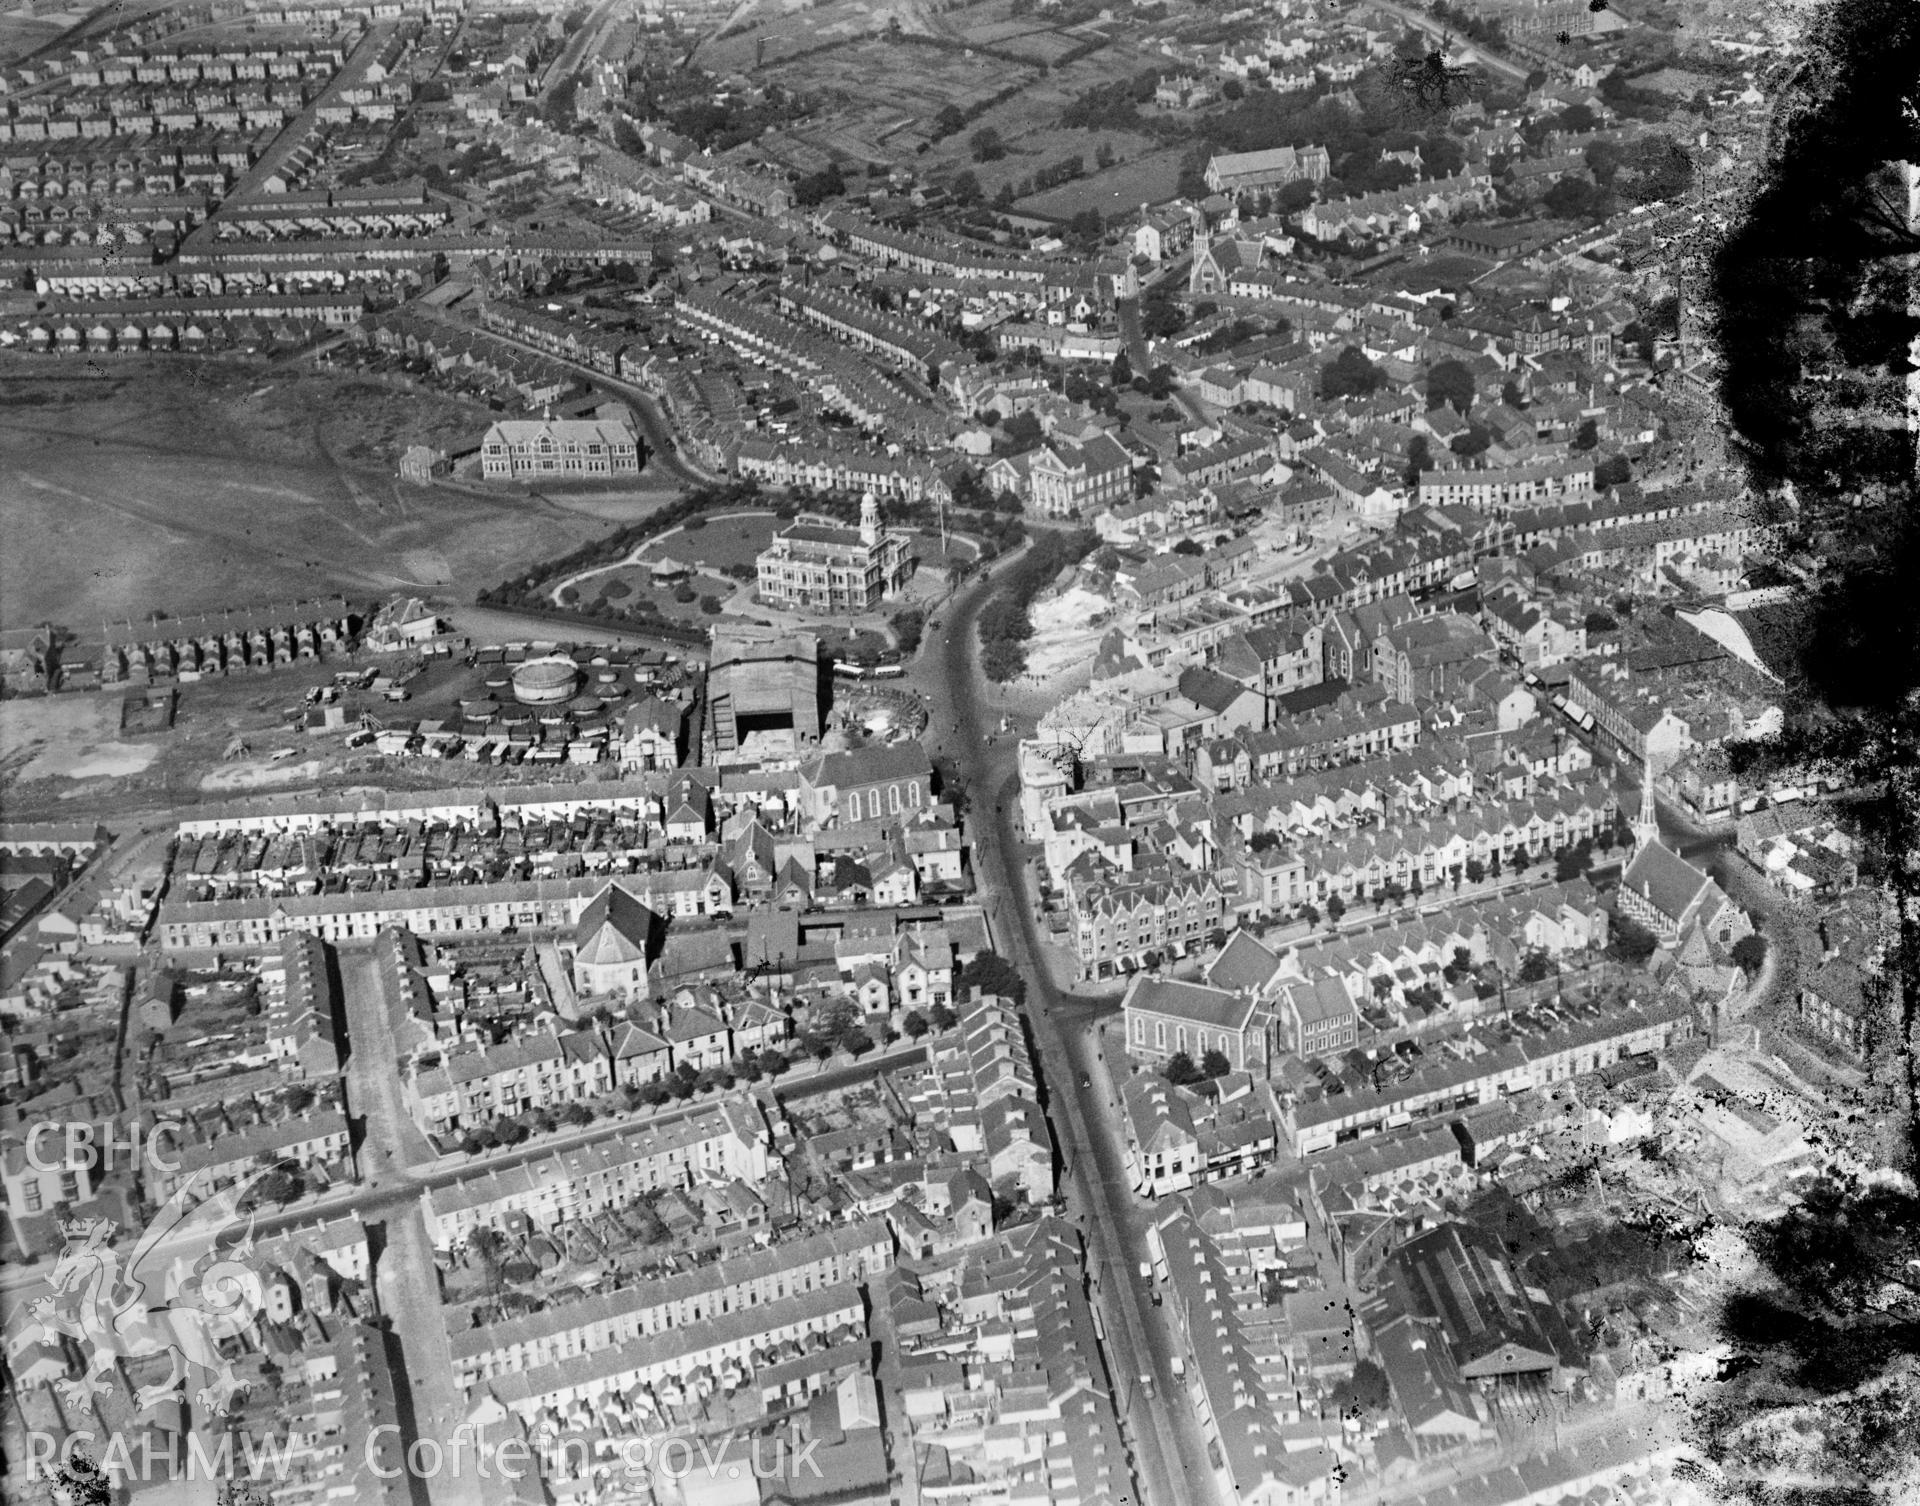 General view of Llanelli, showing Town Hall, oblique aerial view. 5?x4? black and white glass plate negative.